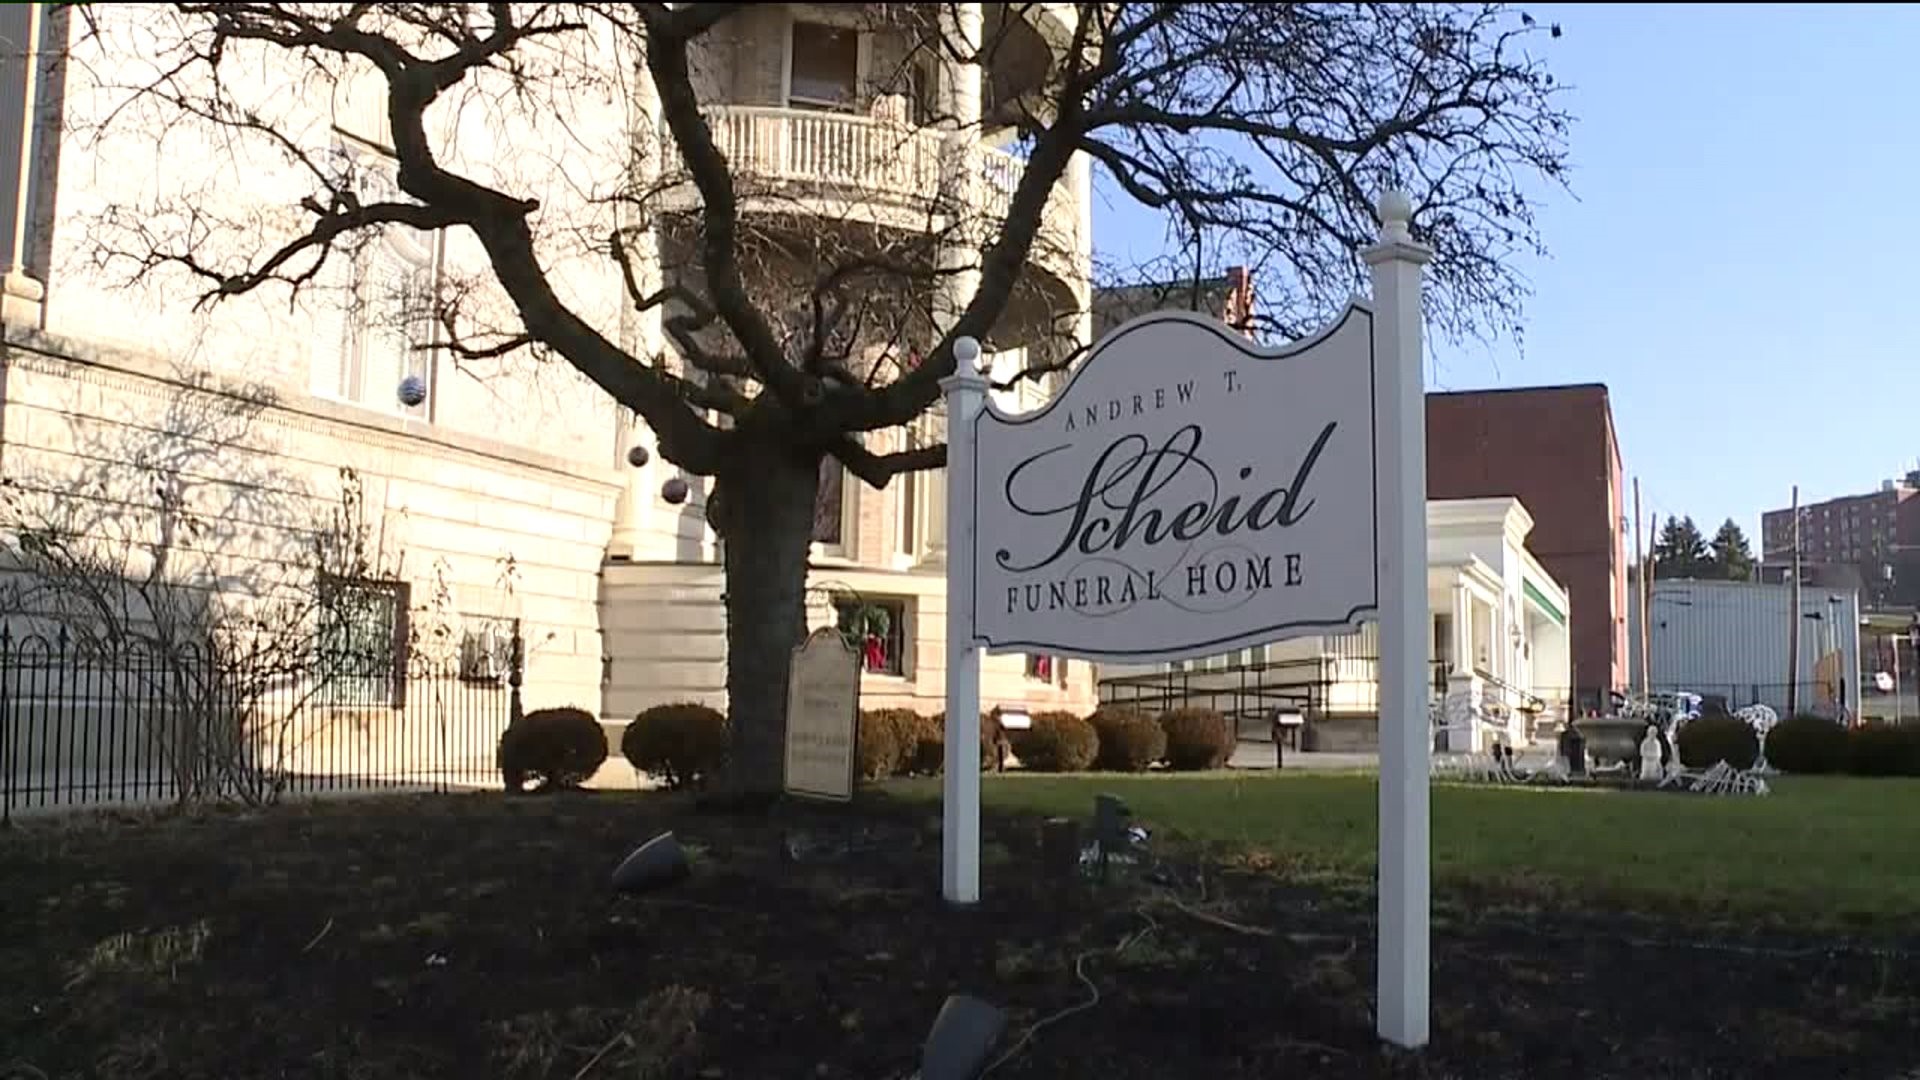 PA Funeral Home Accused of Mistreating Bodies